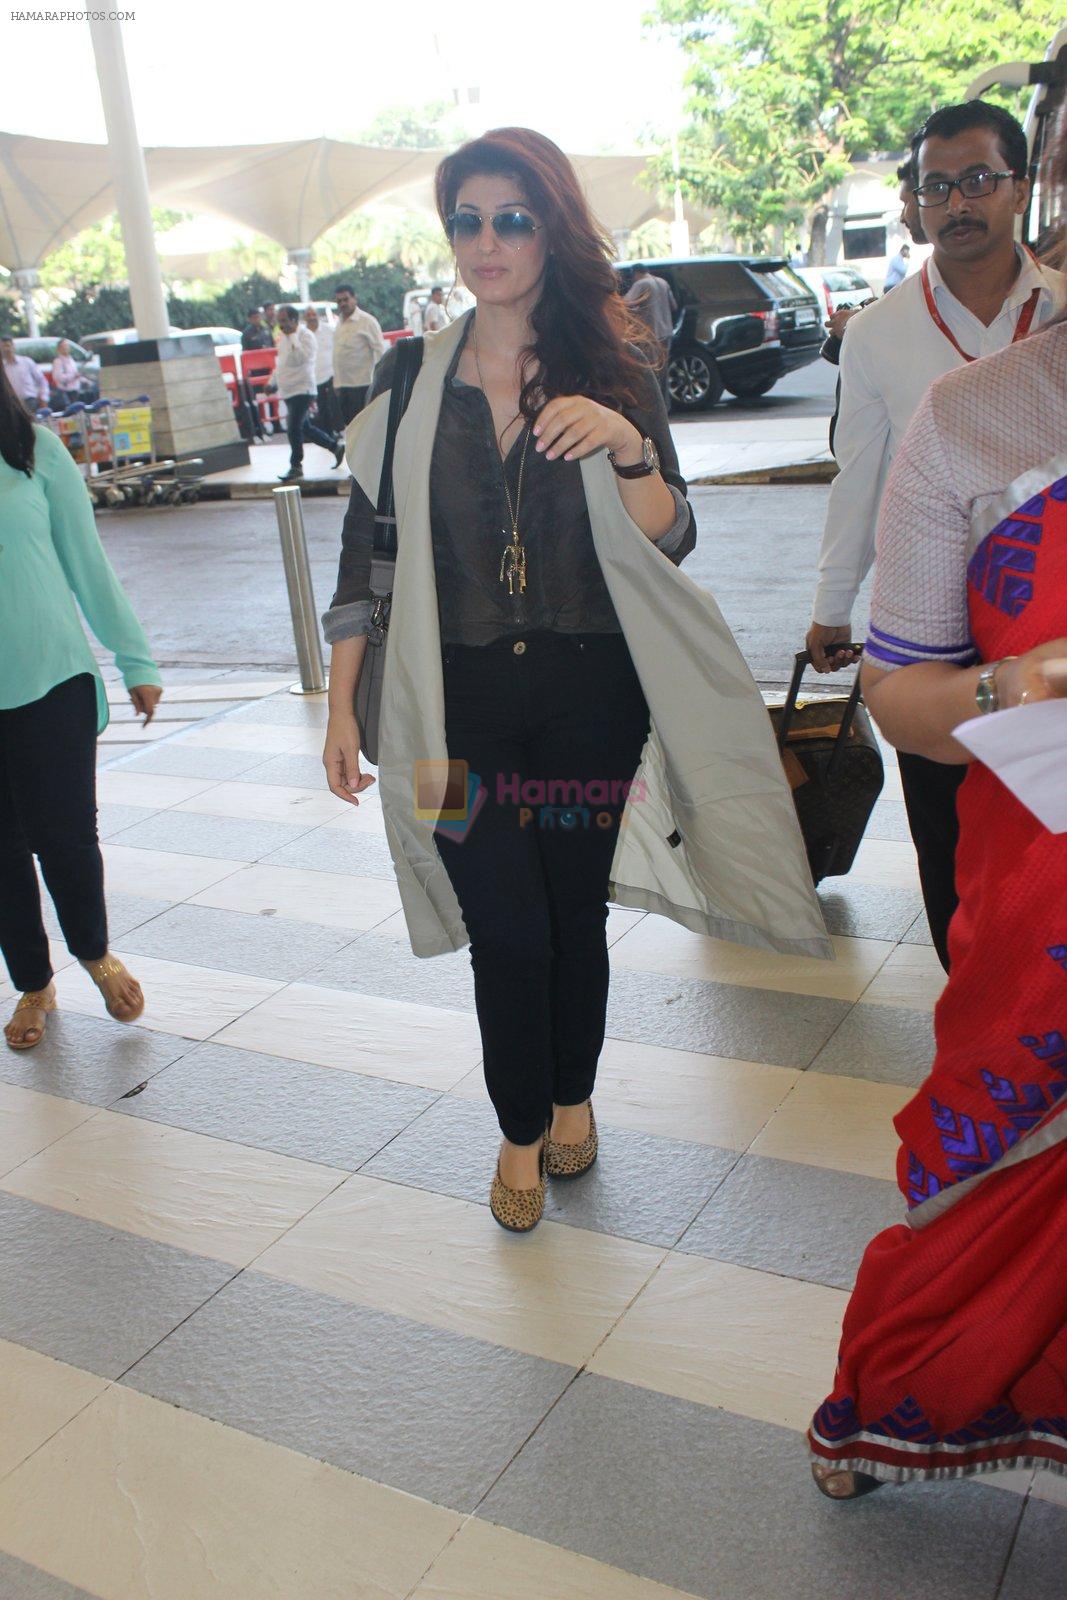 Twinkle Khanna snapped at airport on 14th March 2016